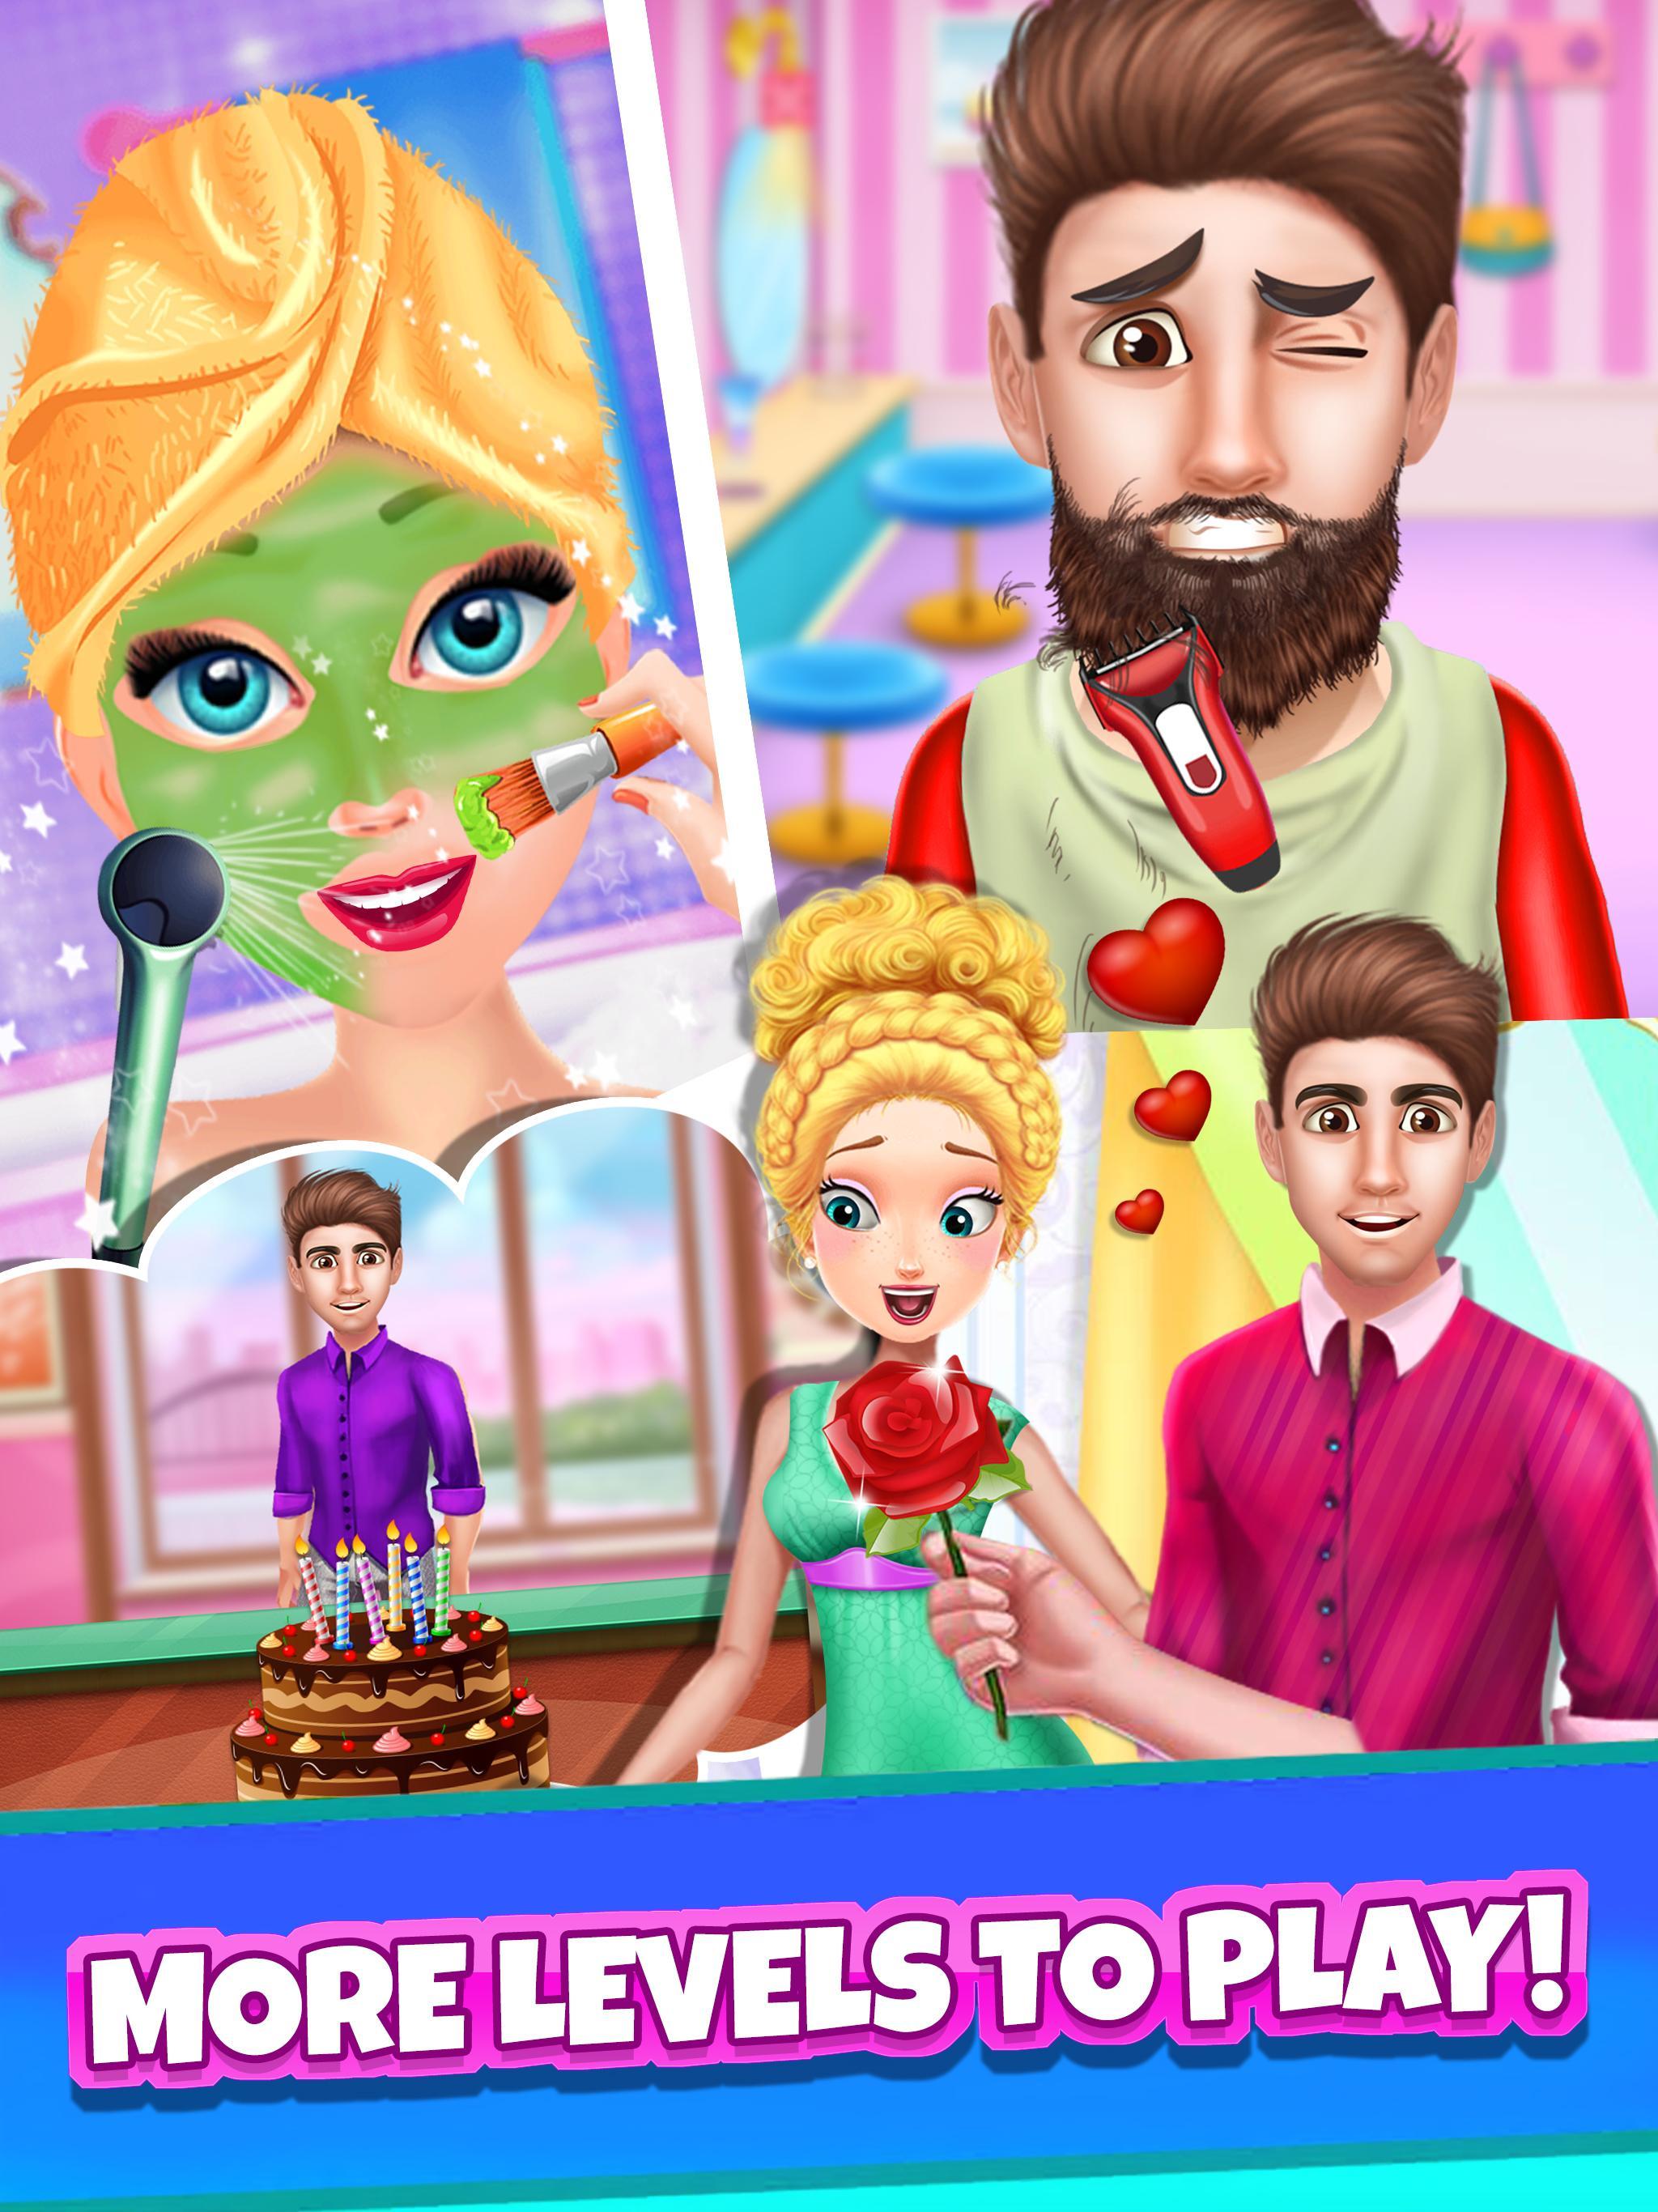 Shave Me Hair Salon Games Dress Up & Haircut Games for 